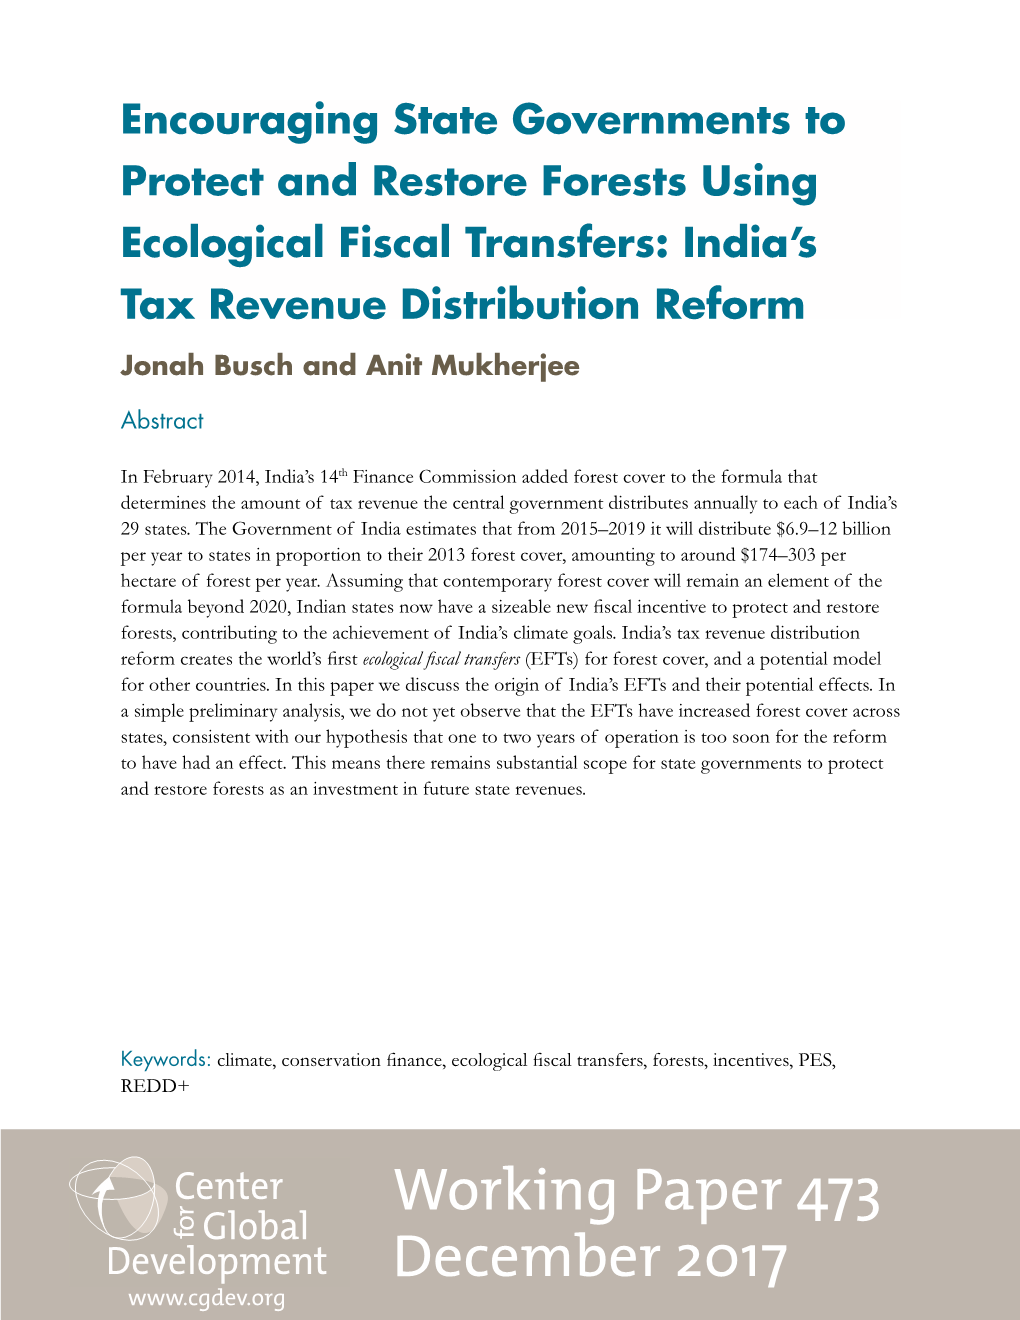 Encouraging State Governments to Protect and Restore Forests Using Ecological Fiscal Transfers: India’S Tax Revenue Distribution Reform Jonah Busch and Anit Mukherjee